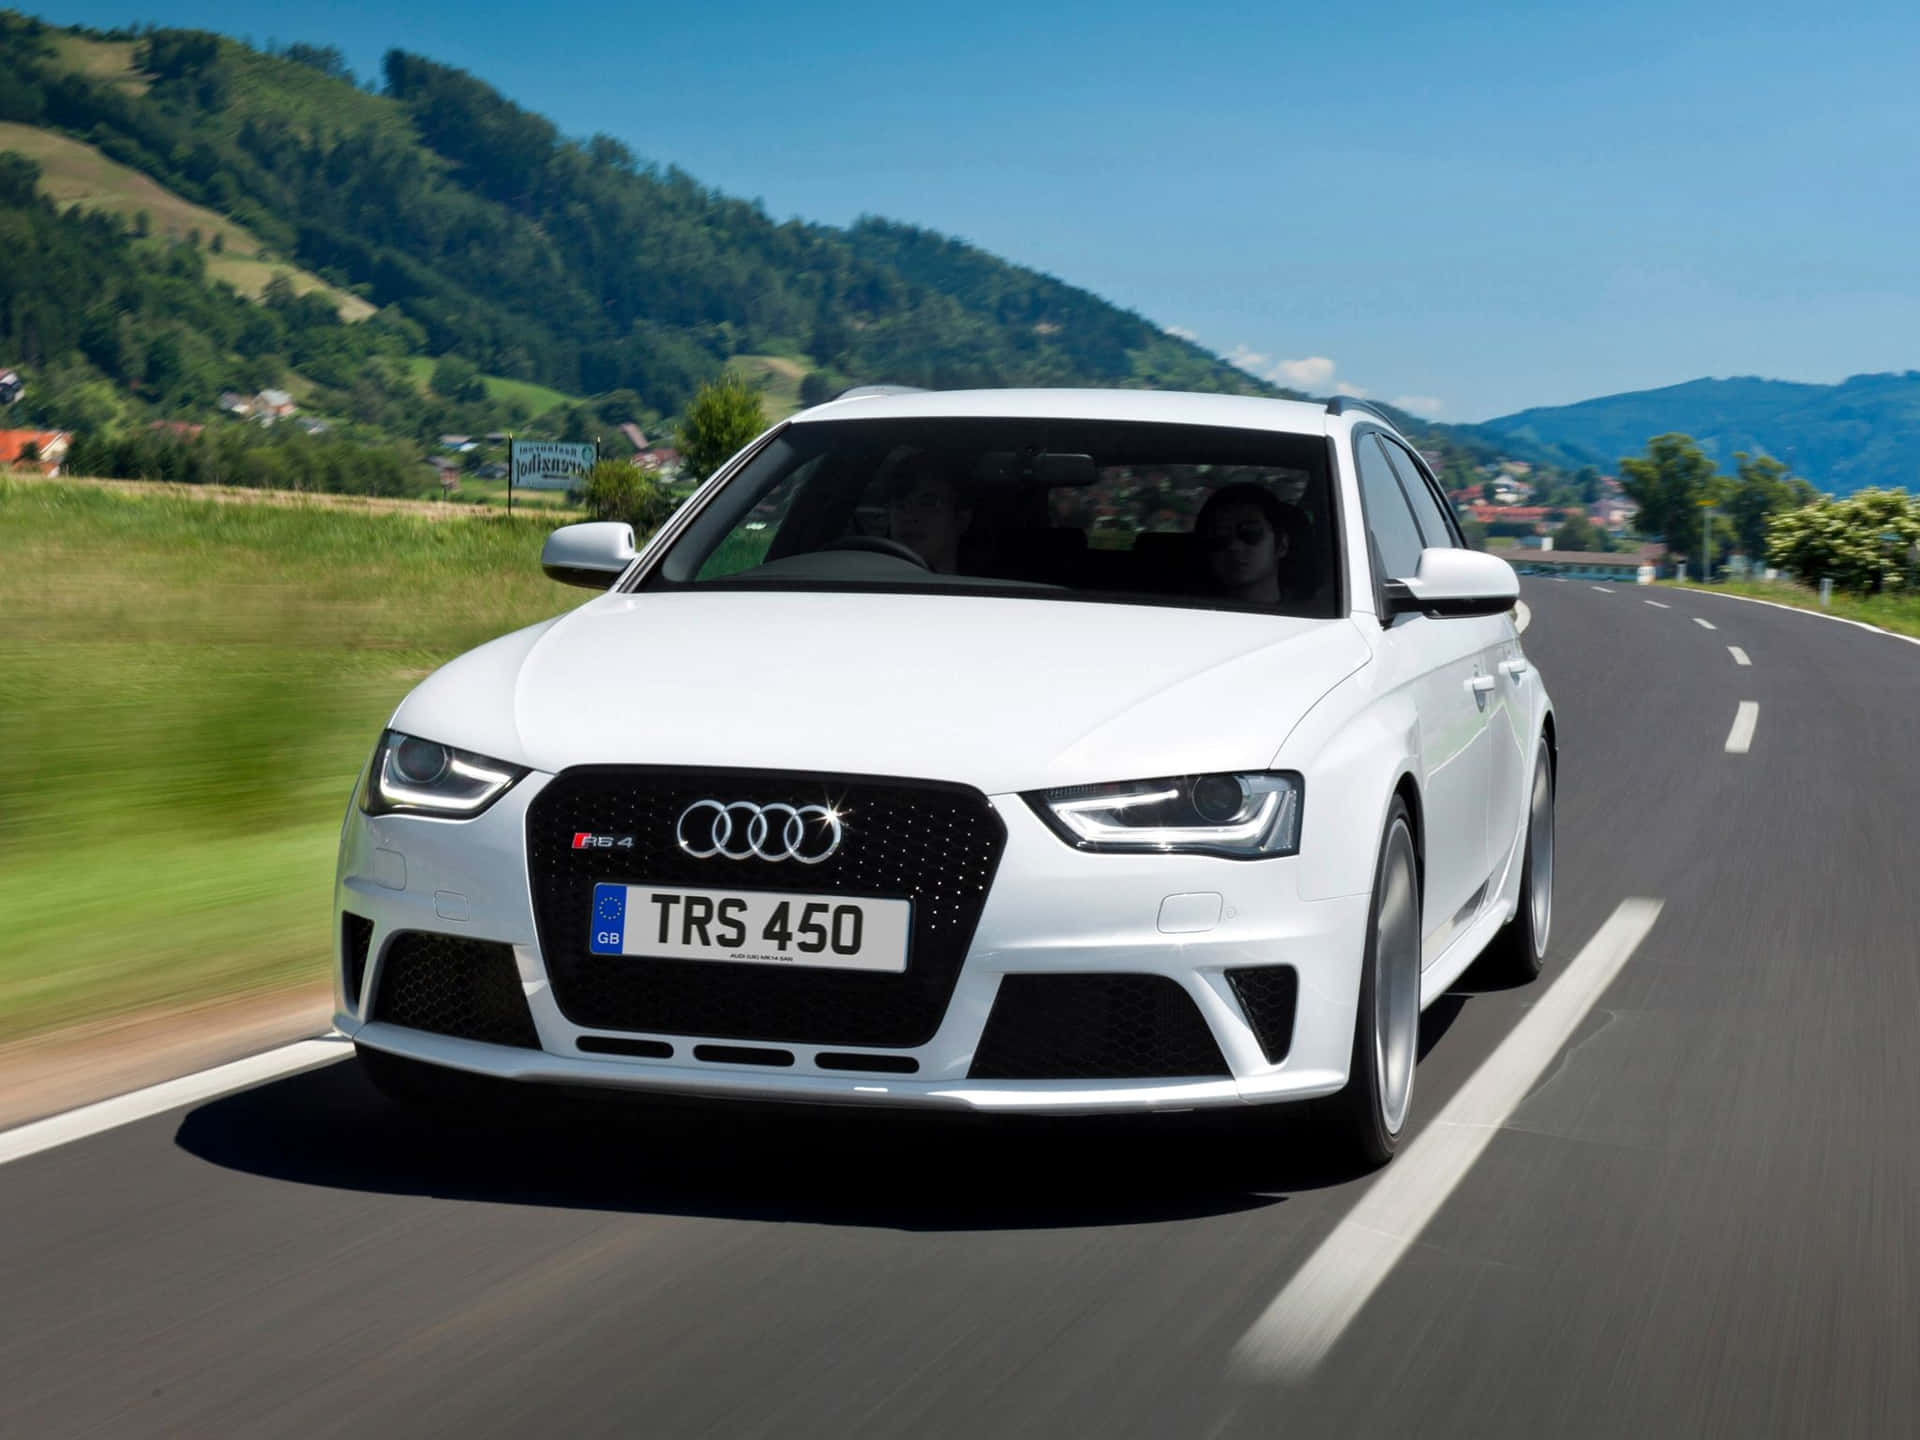 Sleek Audi RS5 Coupe in Action Wallpaper